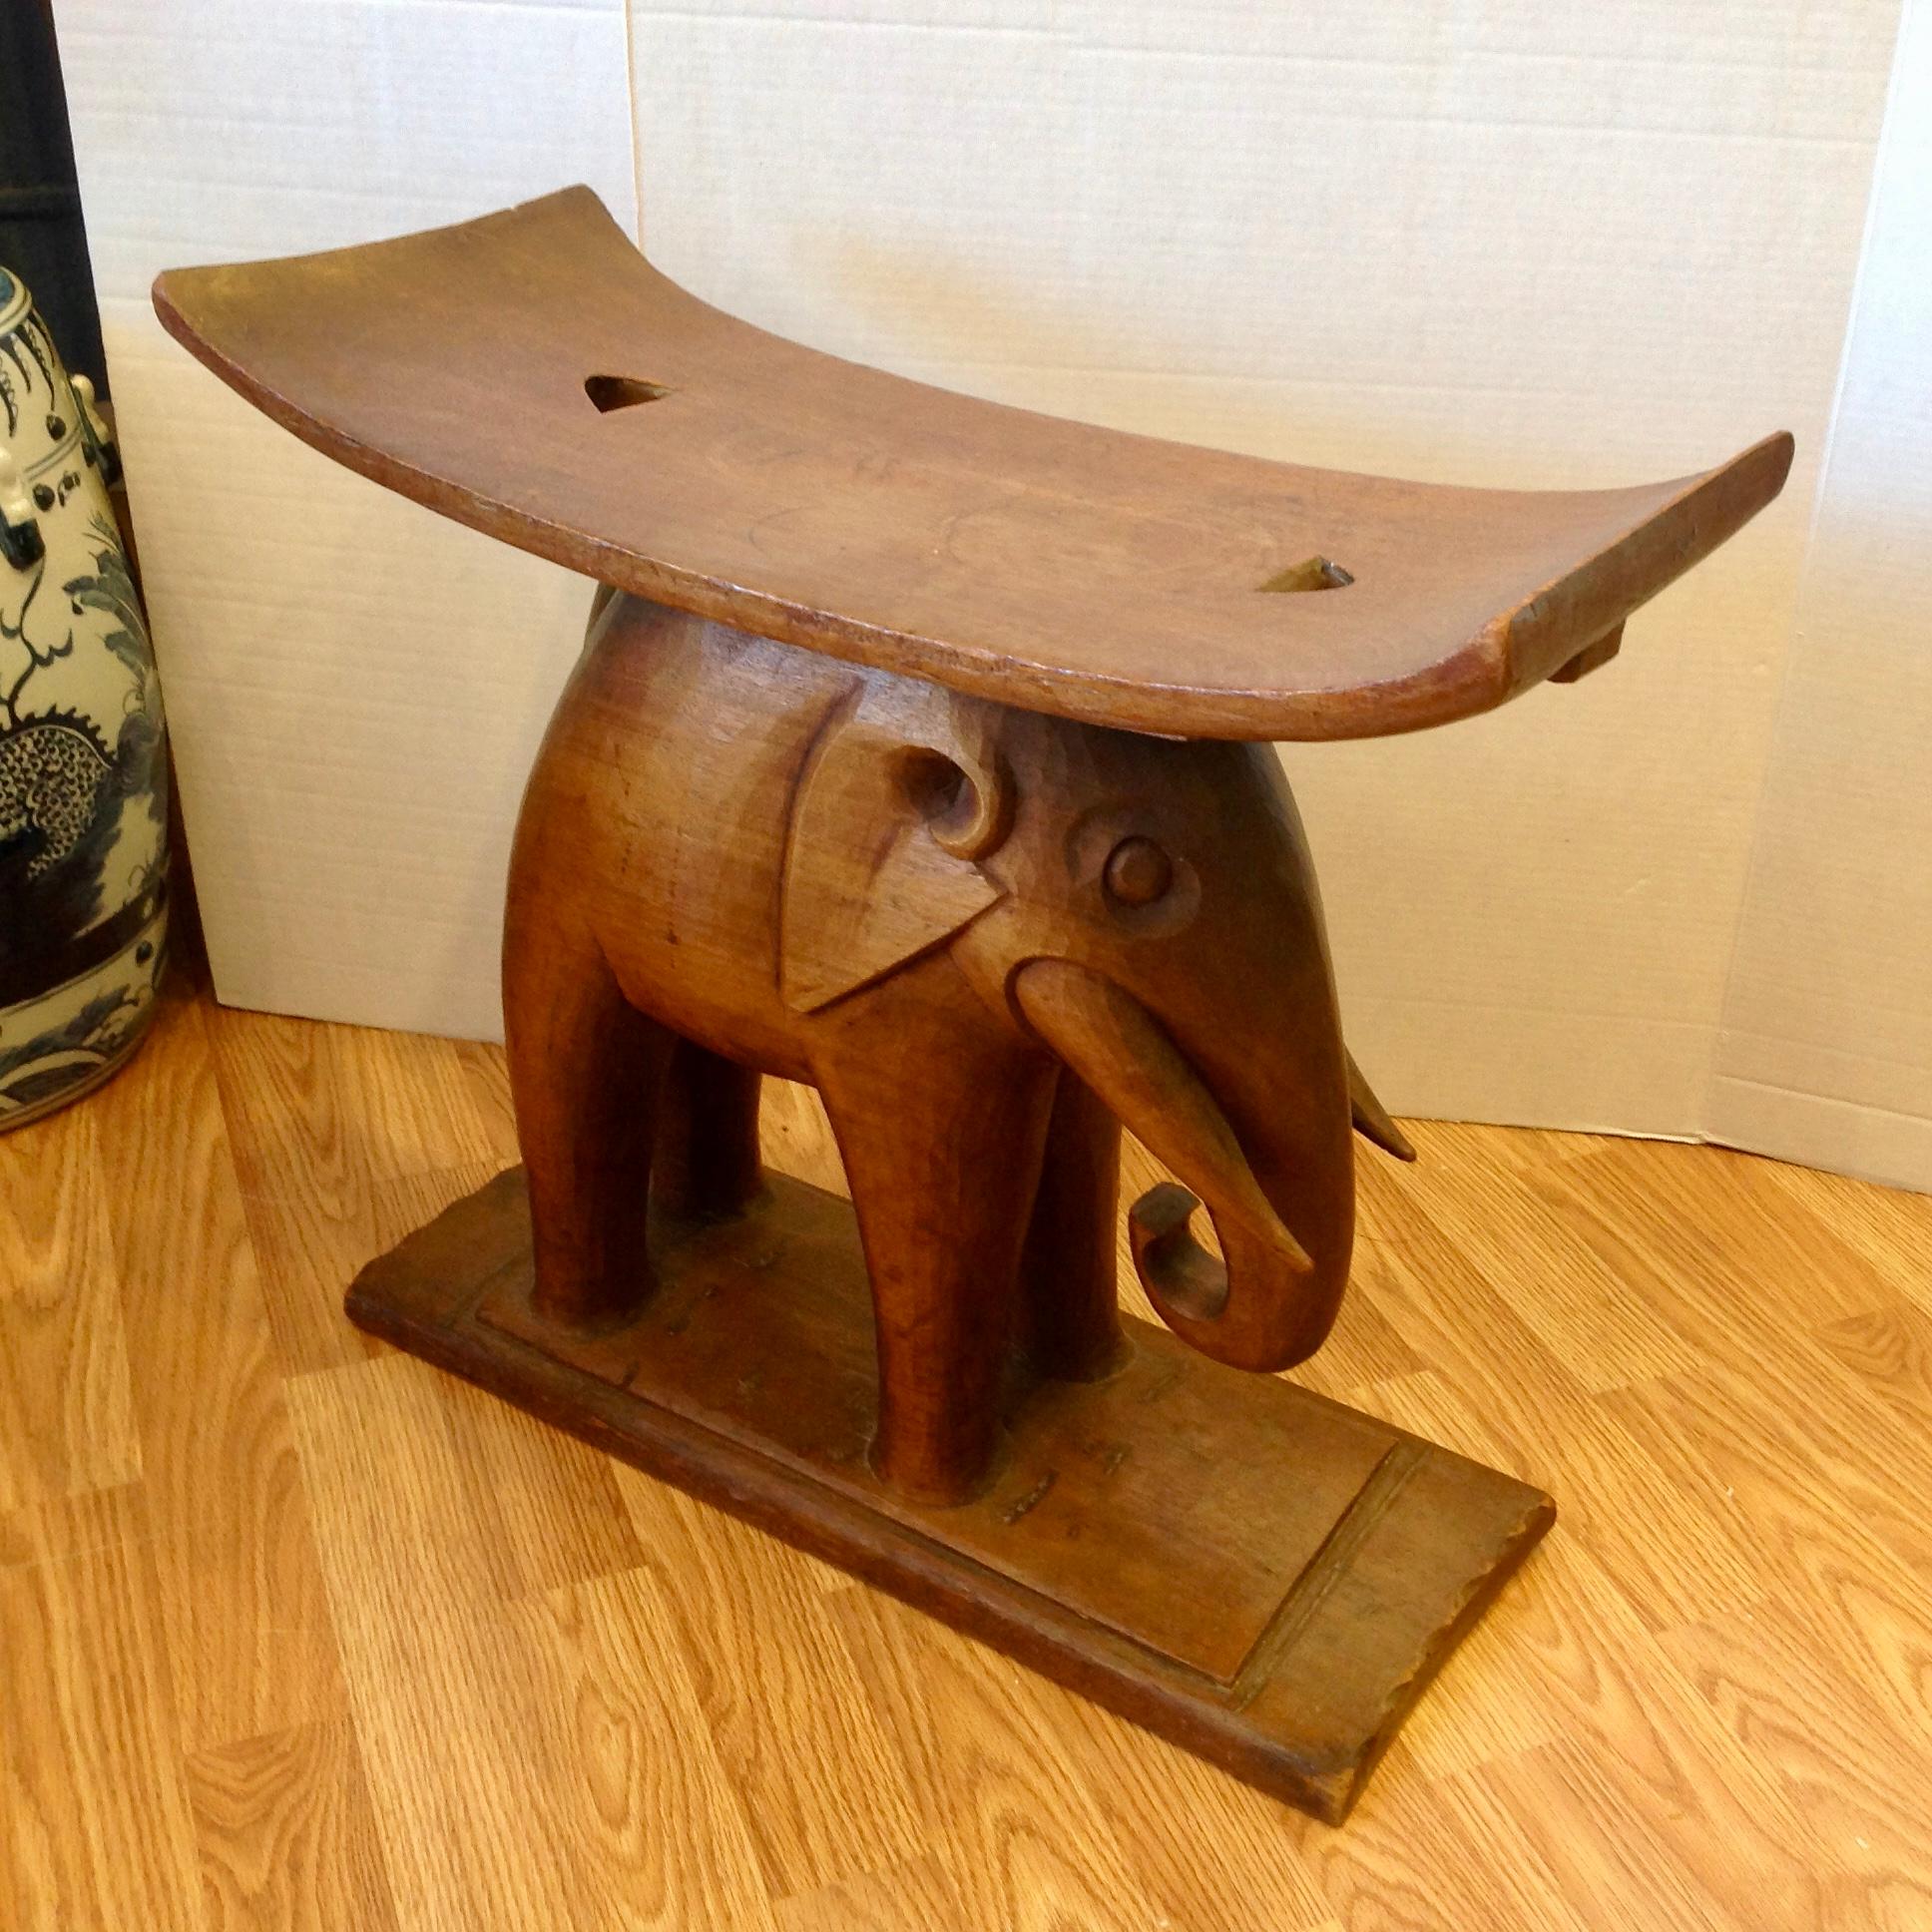 The elephant is carved from a single piece of wood - a Classic form.
Nicely proportioned and stylized.